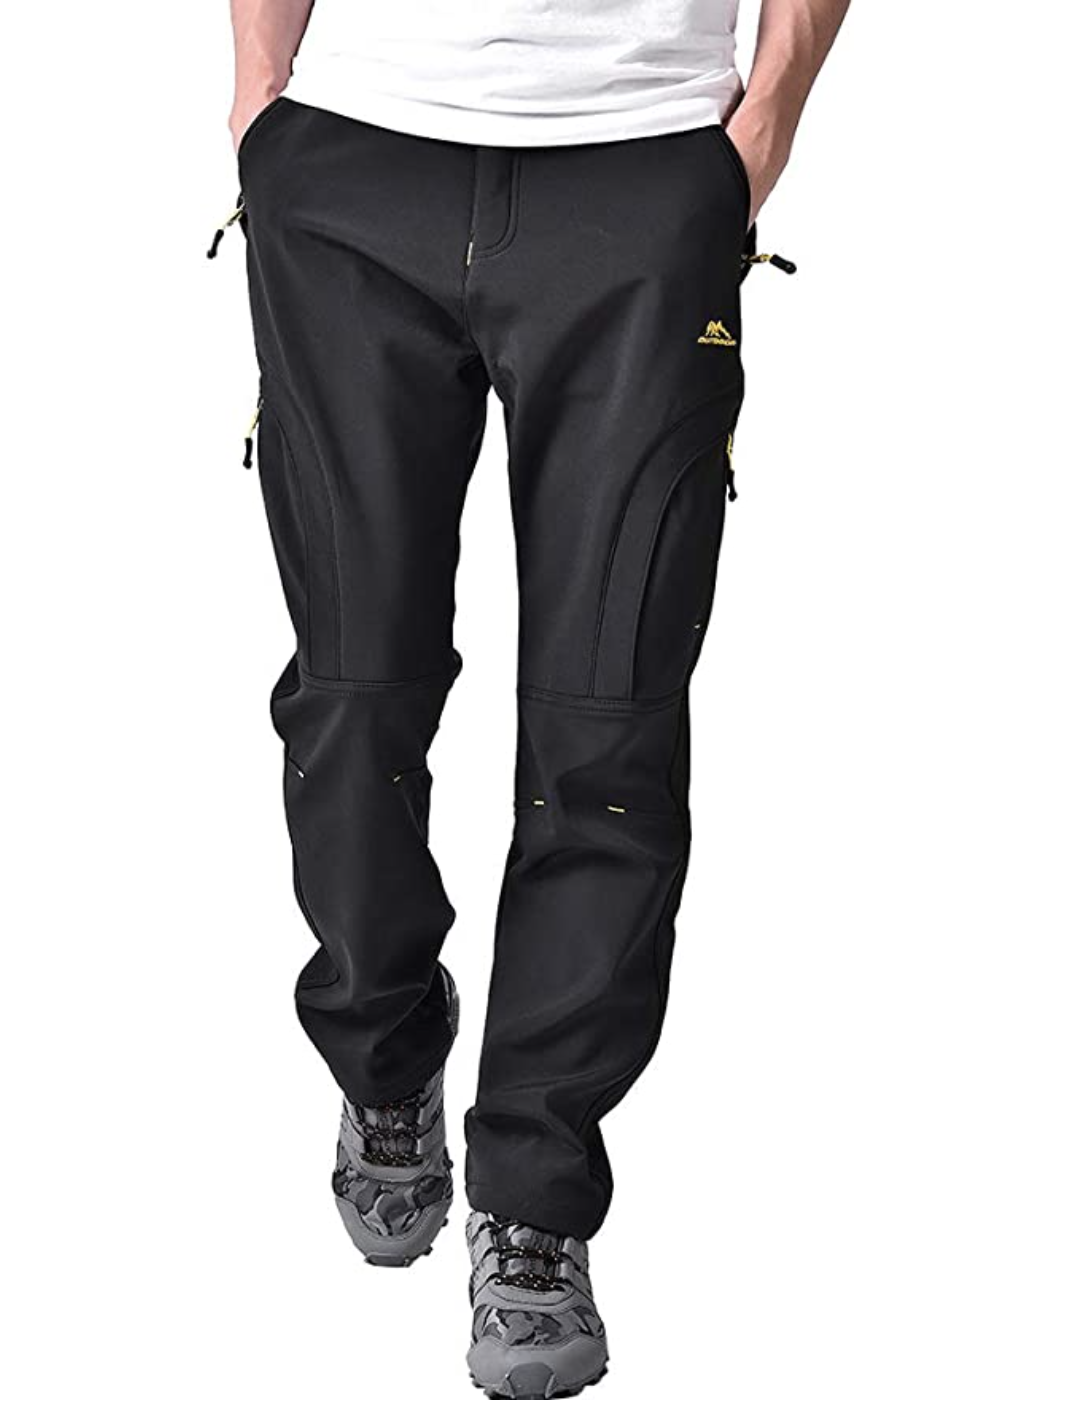 black winter pants for men with pockets